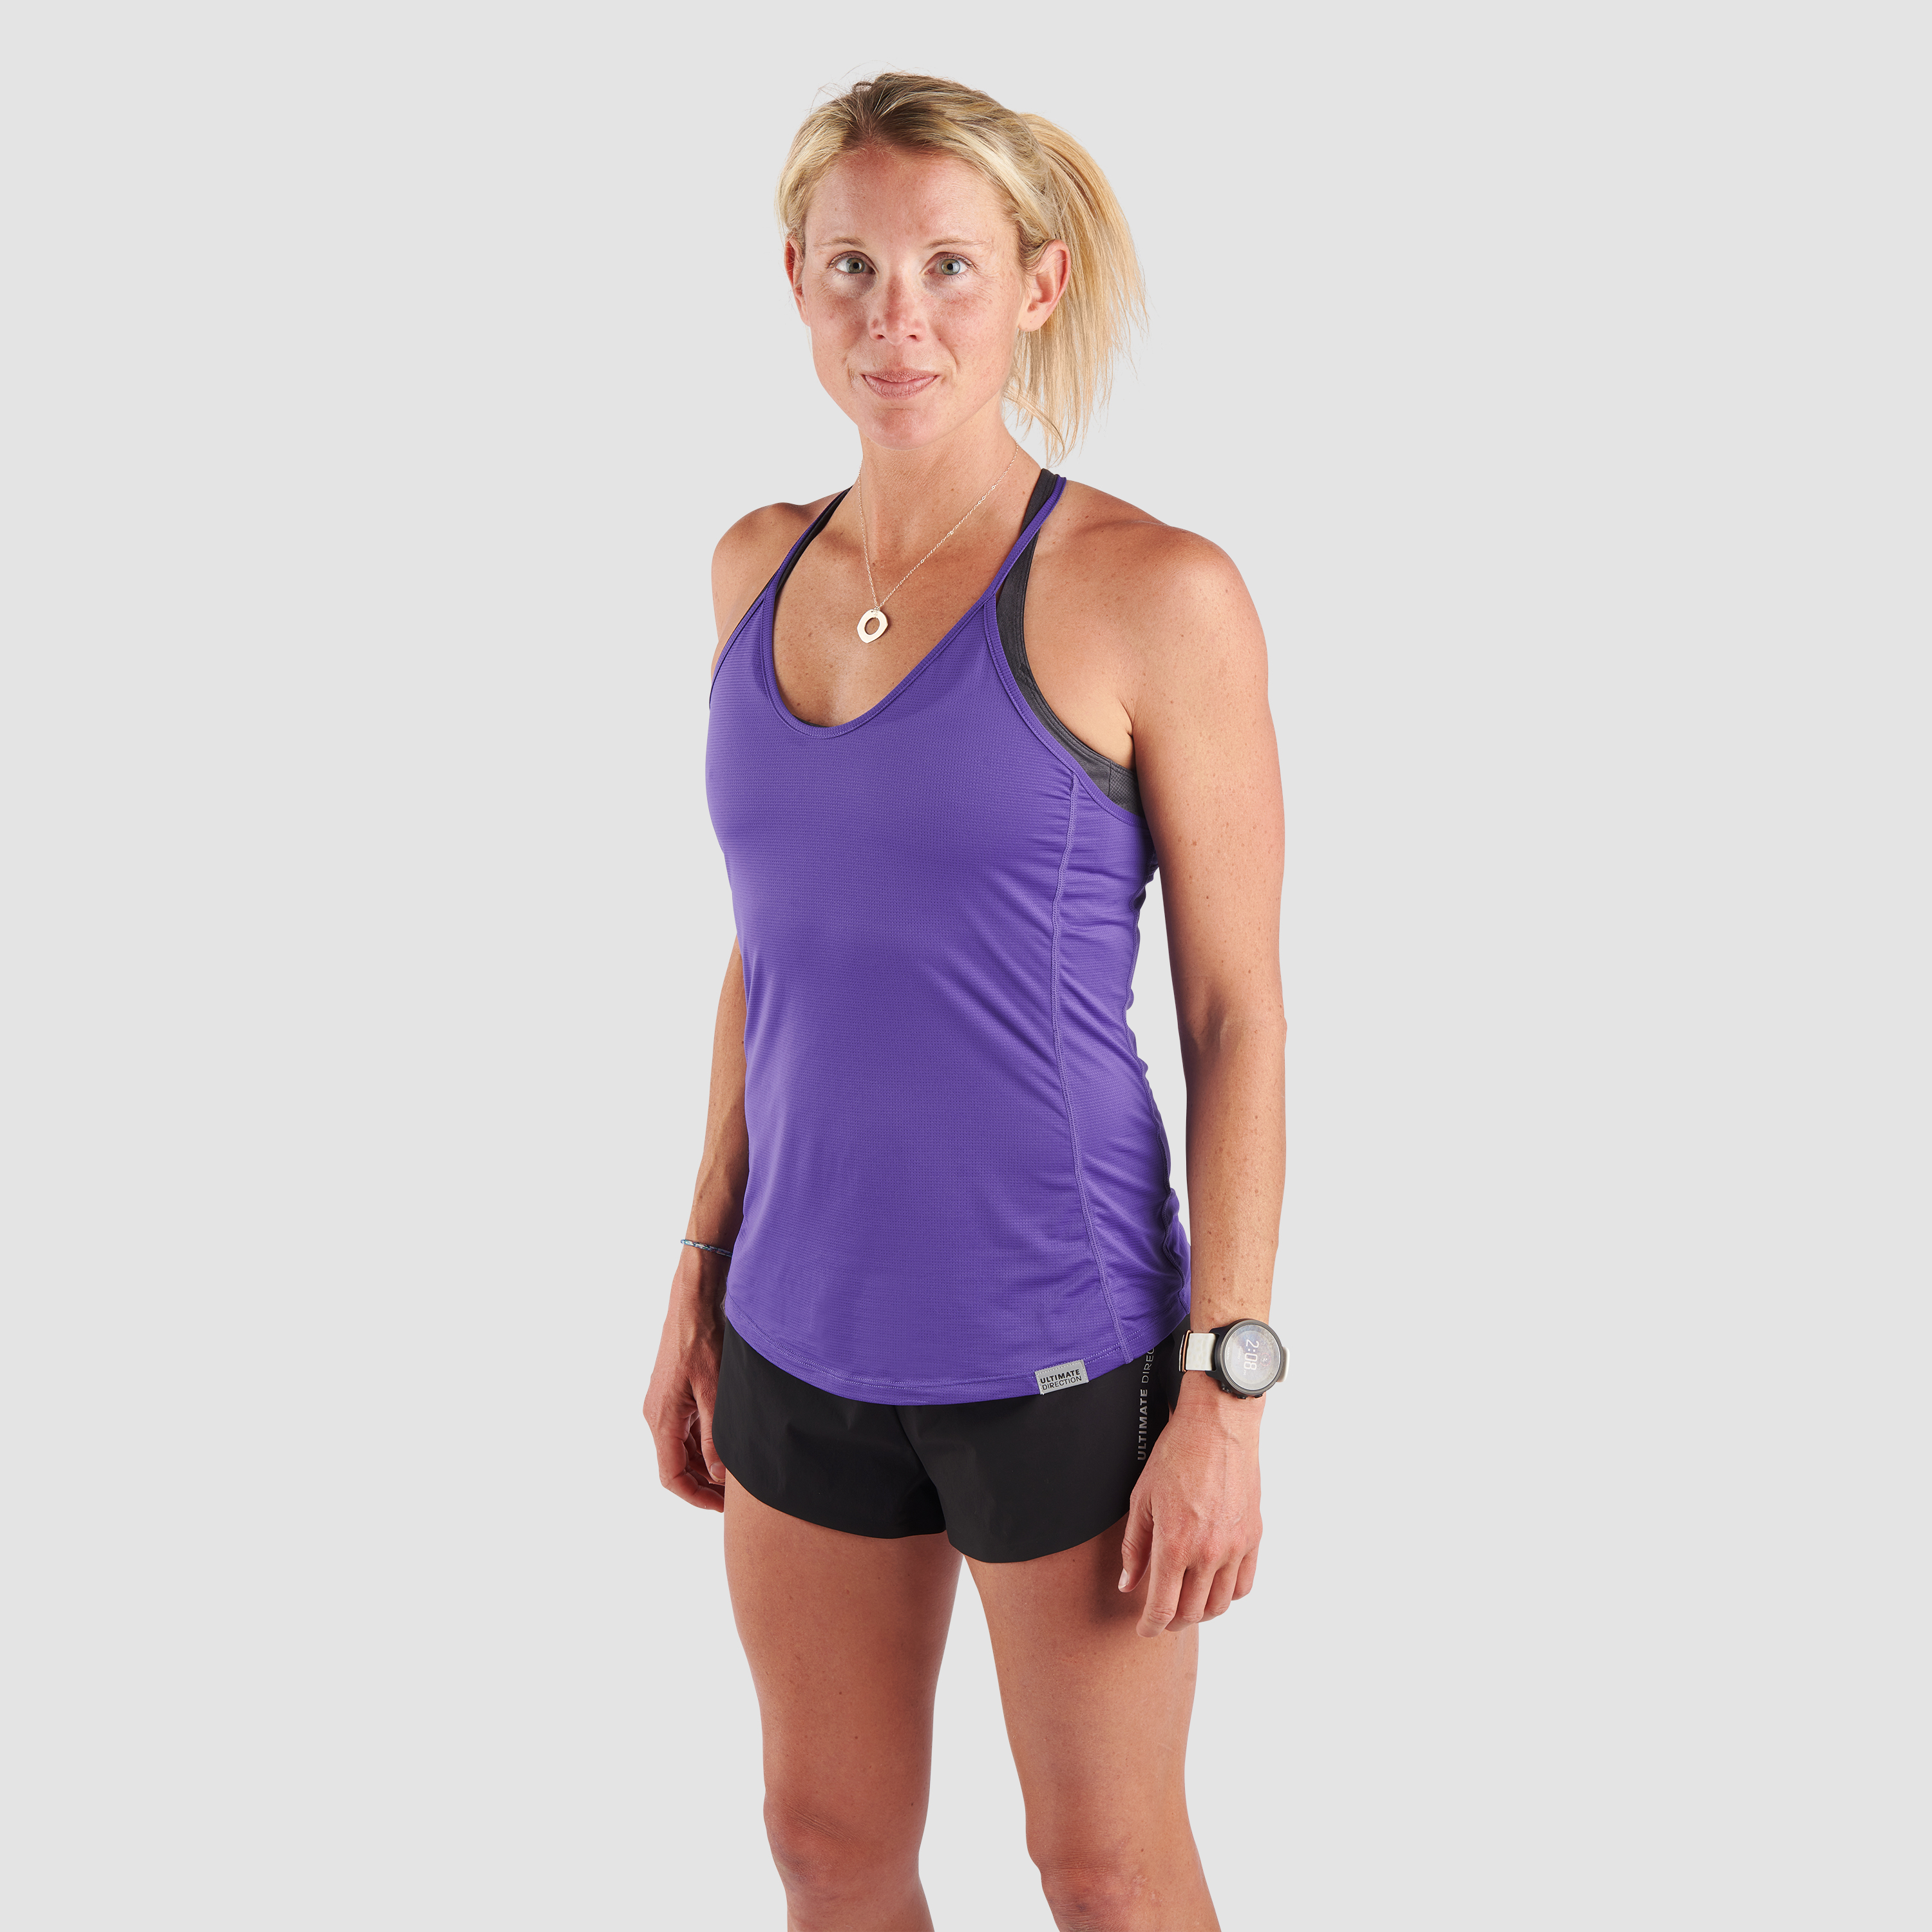 Ultimate Direction Amelia Boone Tank Top in ULTRAVIOLET Size XL